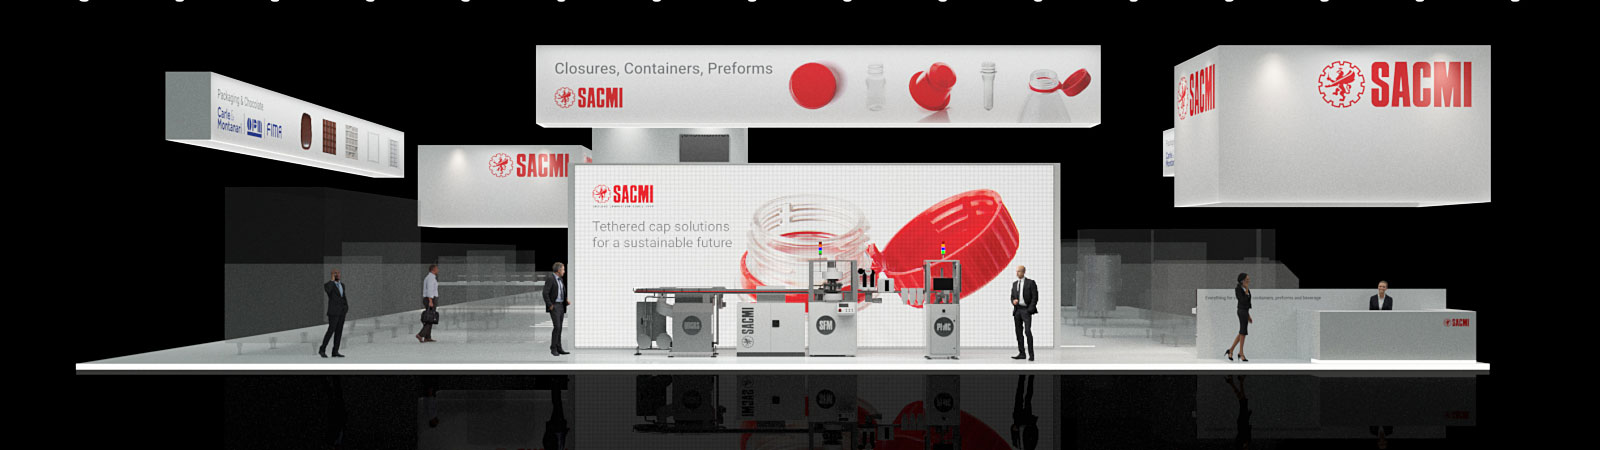 Tethered r-evolution, SACMI virtual booth a Interpack 2020